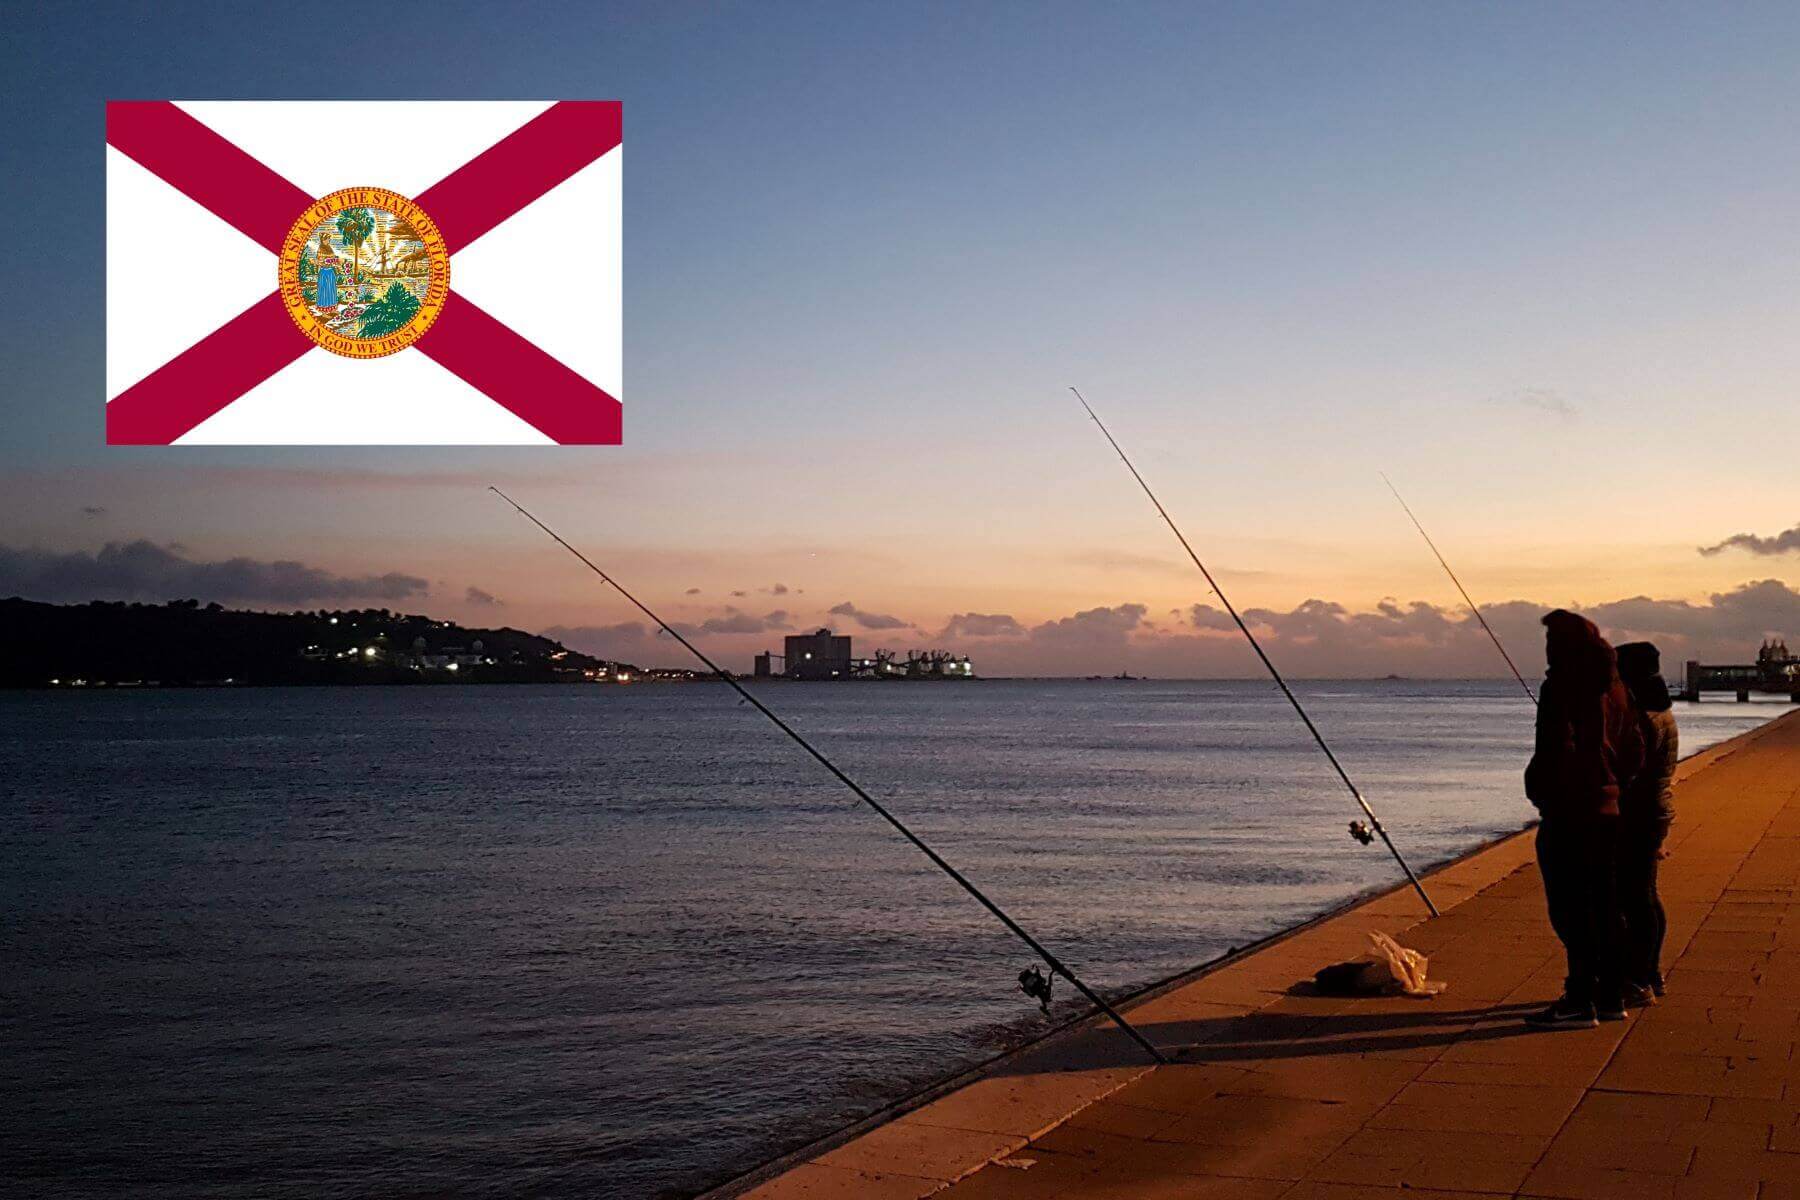 fishing at night photo with flag of florida